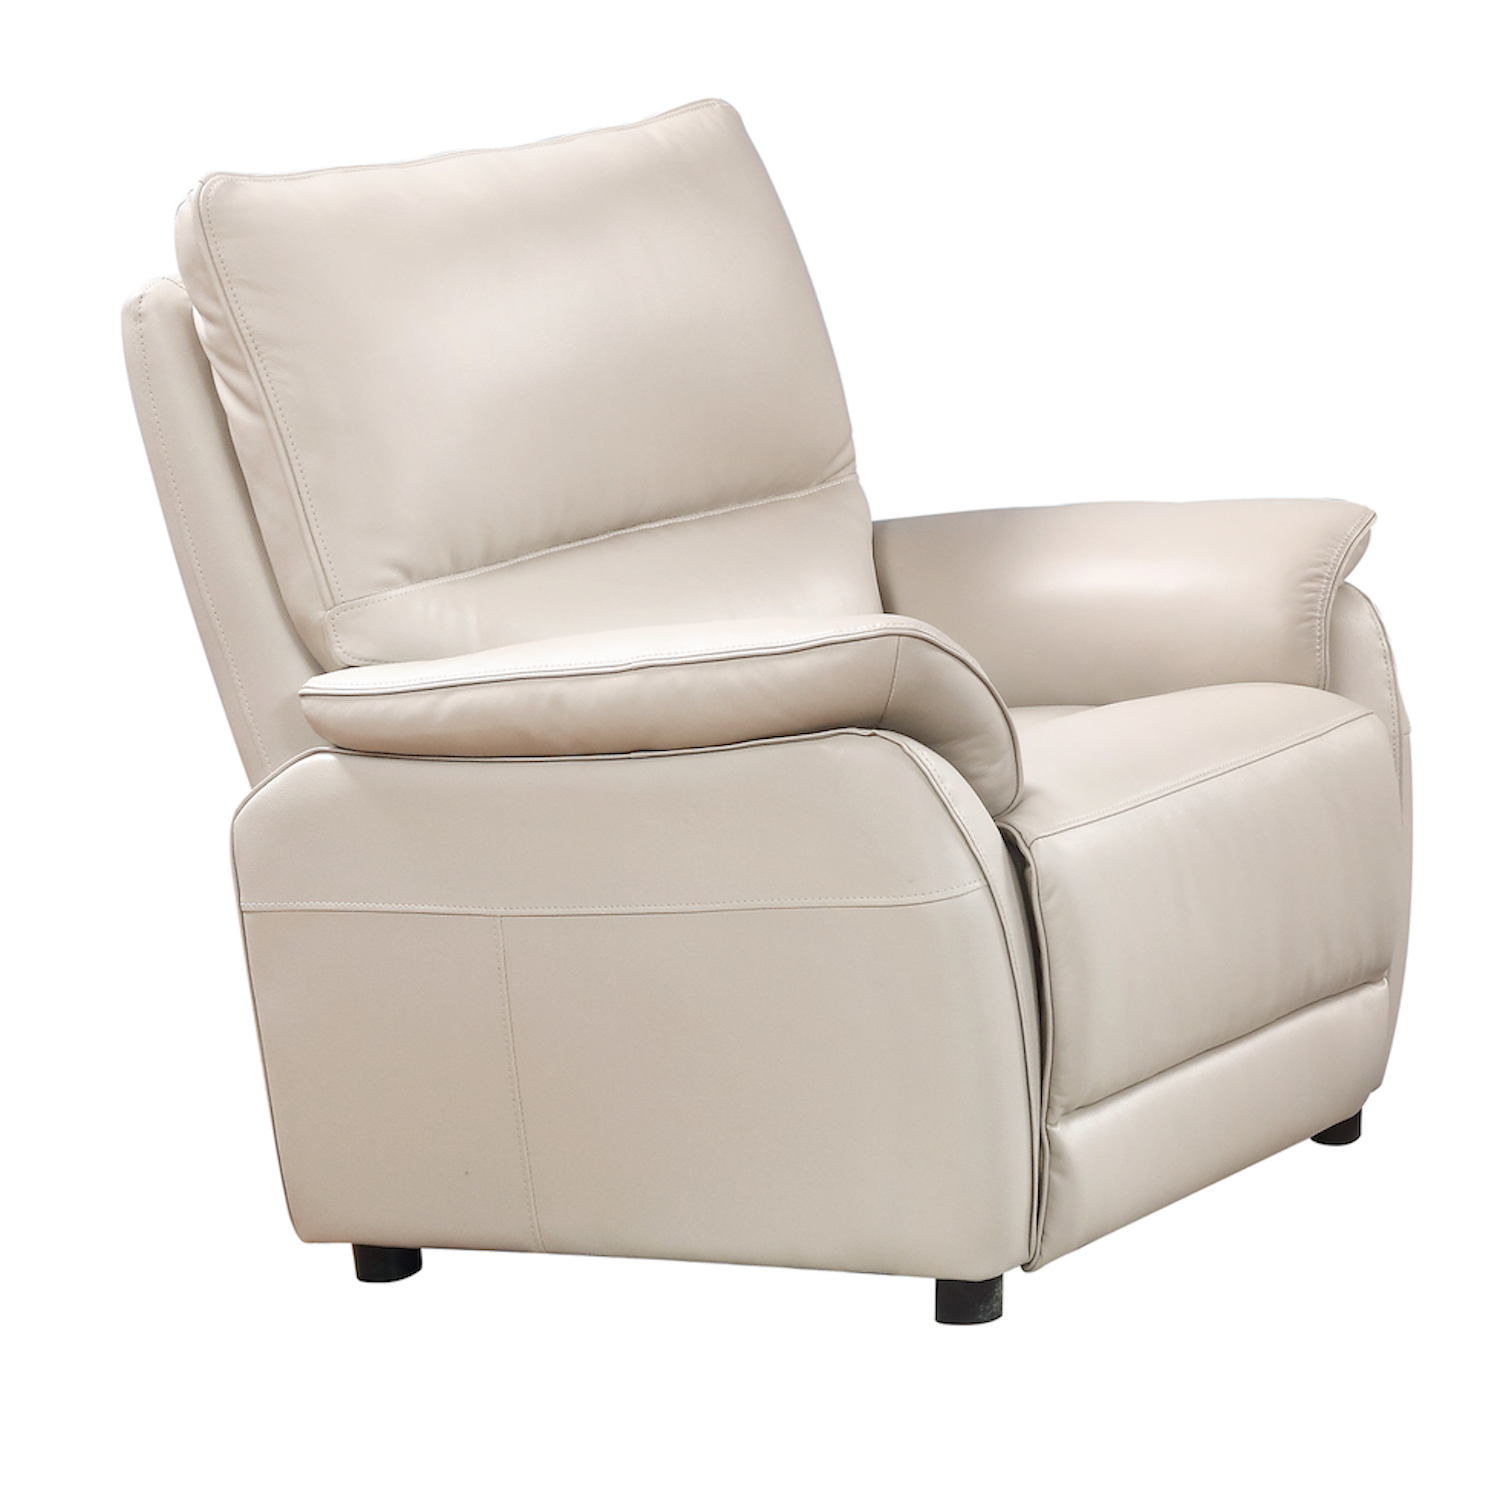 Esprit Manual Recliner Chair Chalk Leather